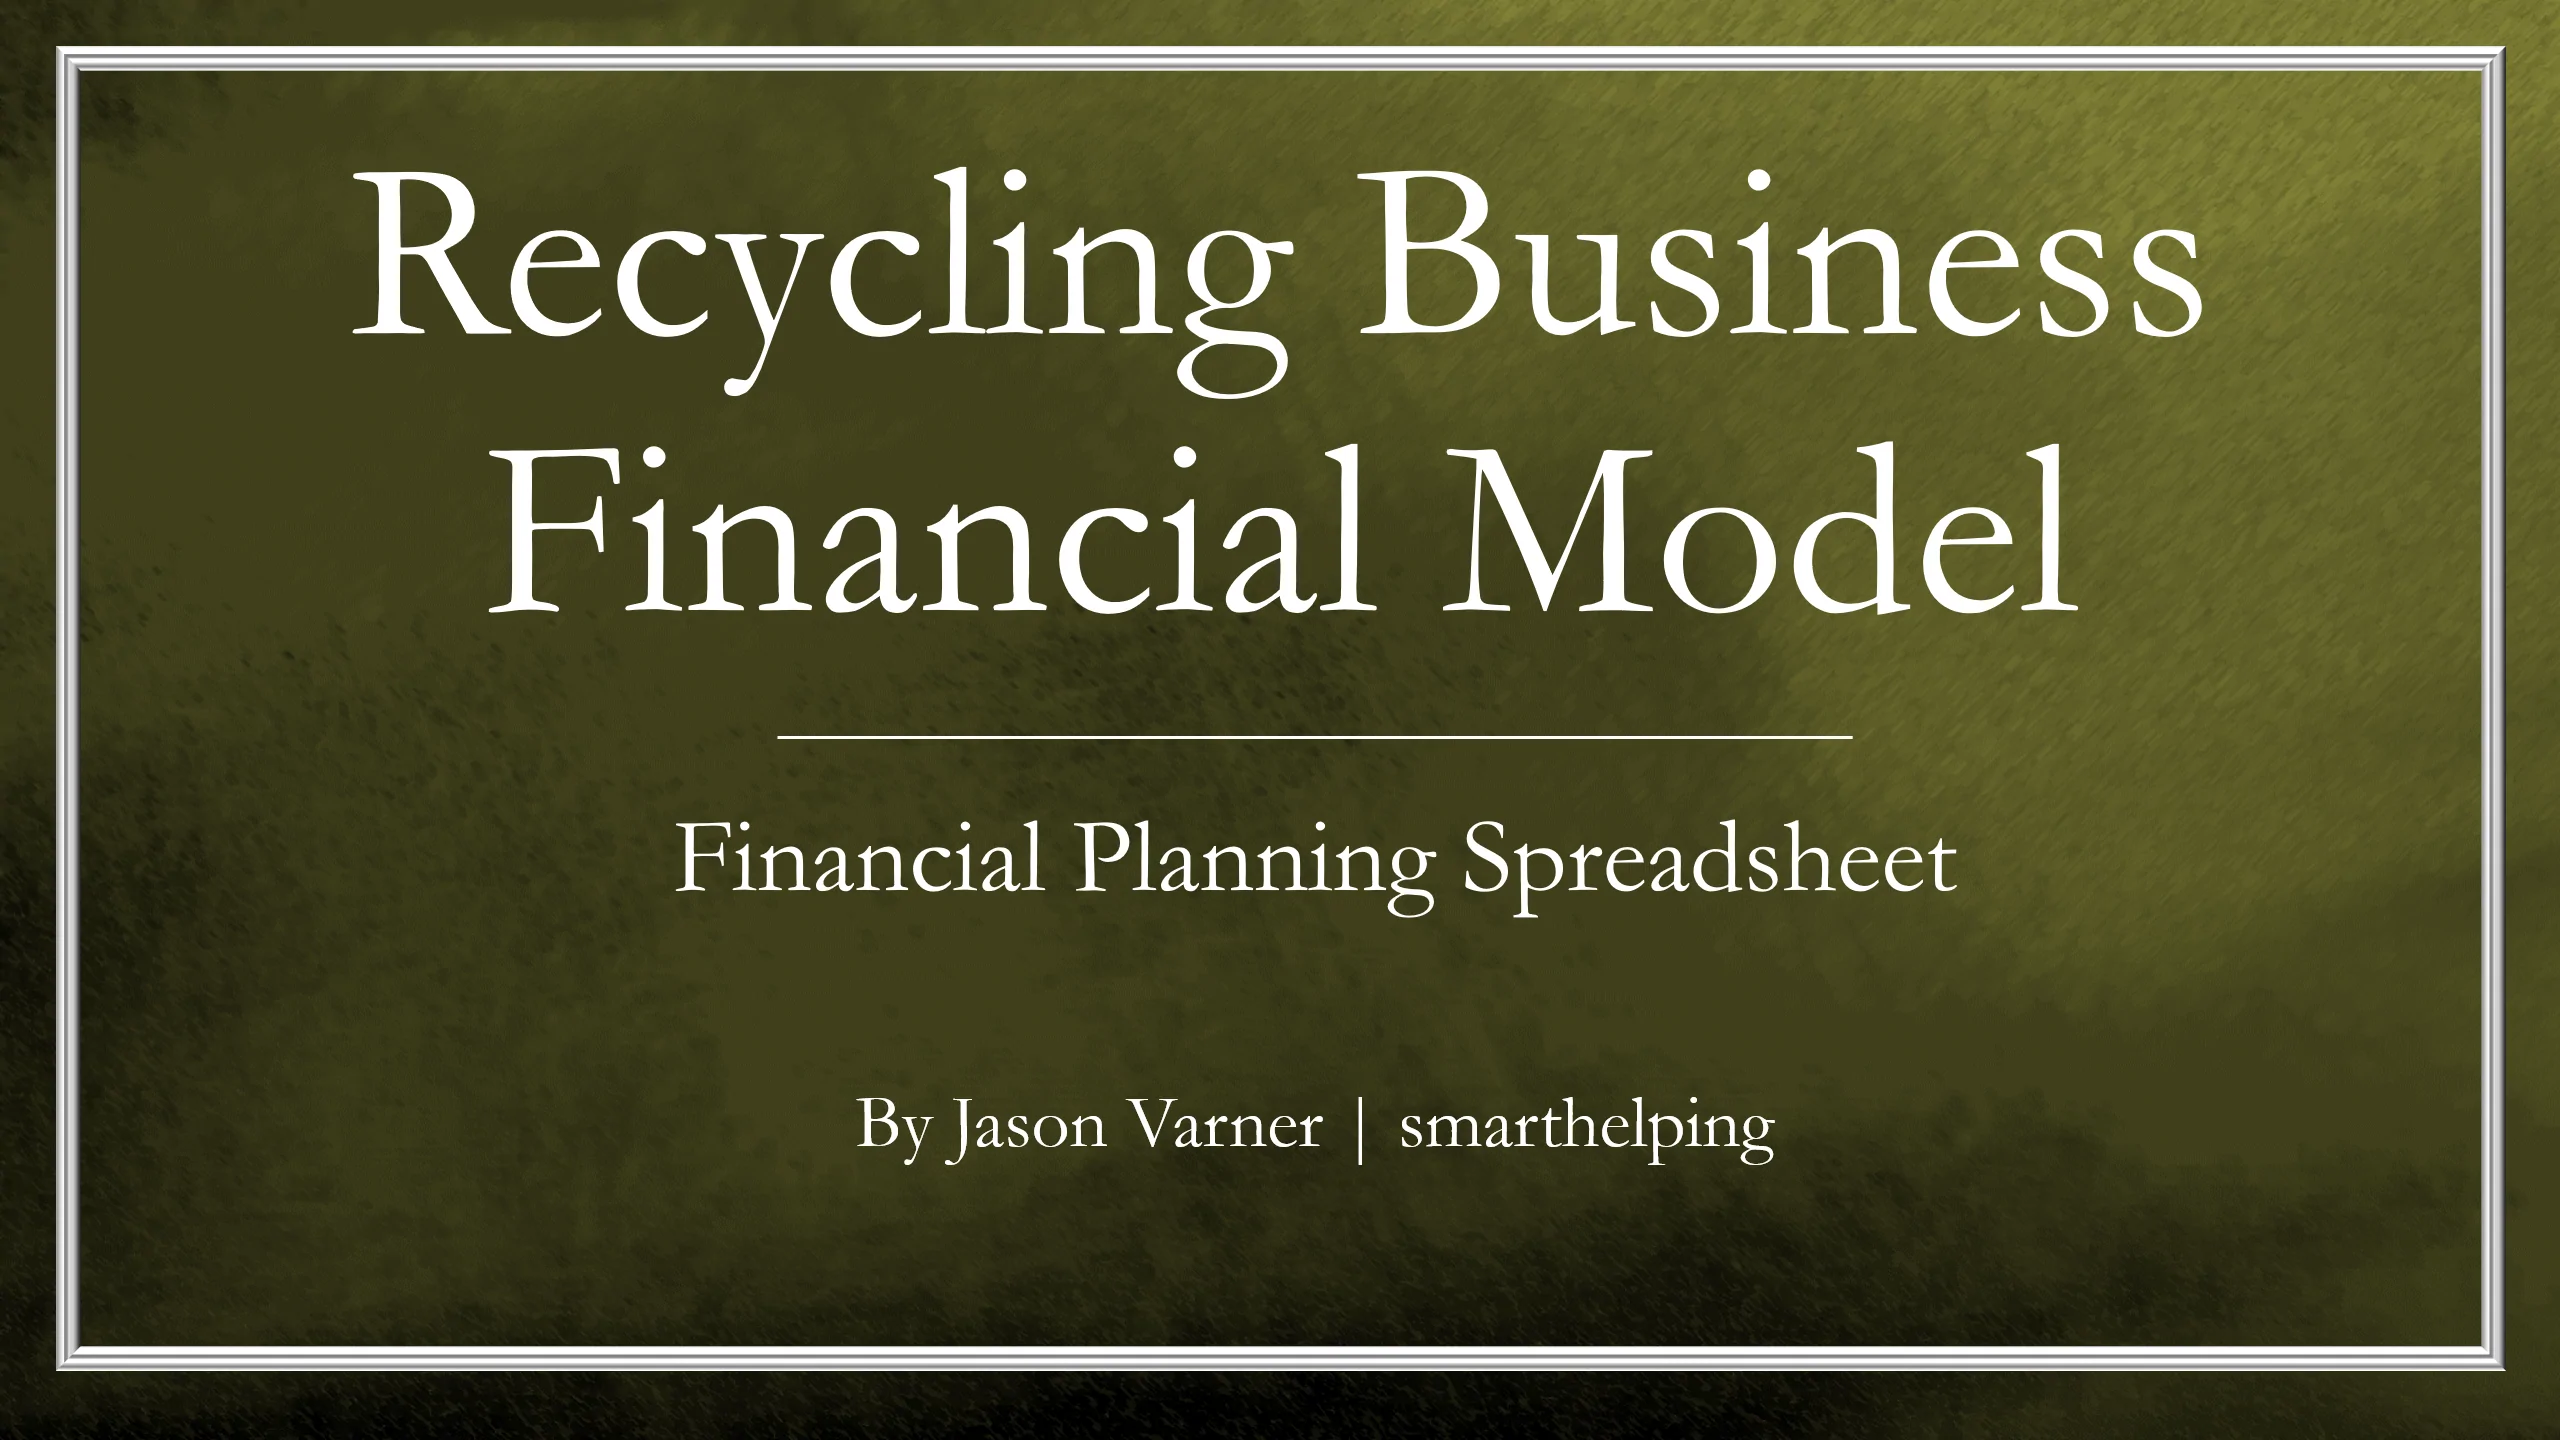 Recycling Business Financial Model